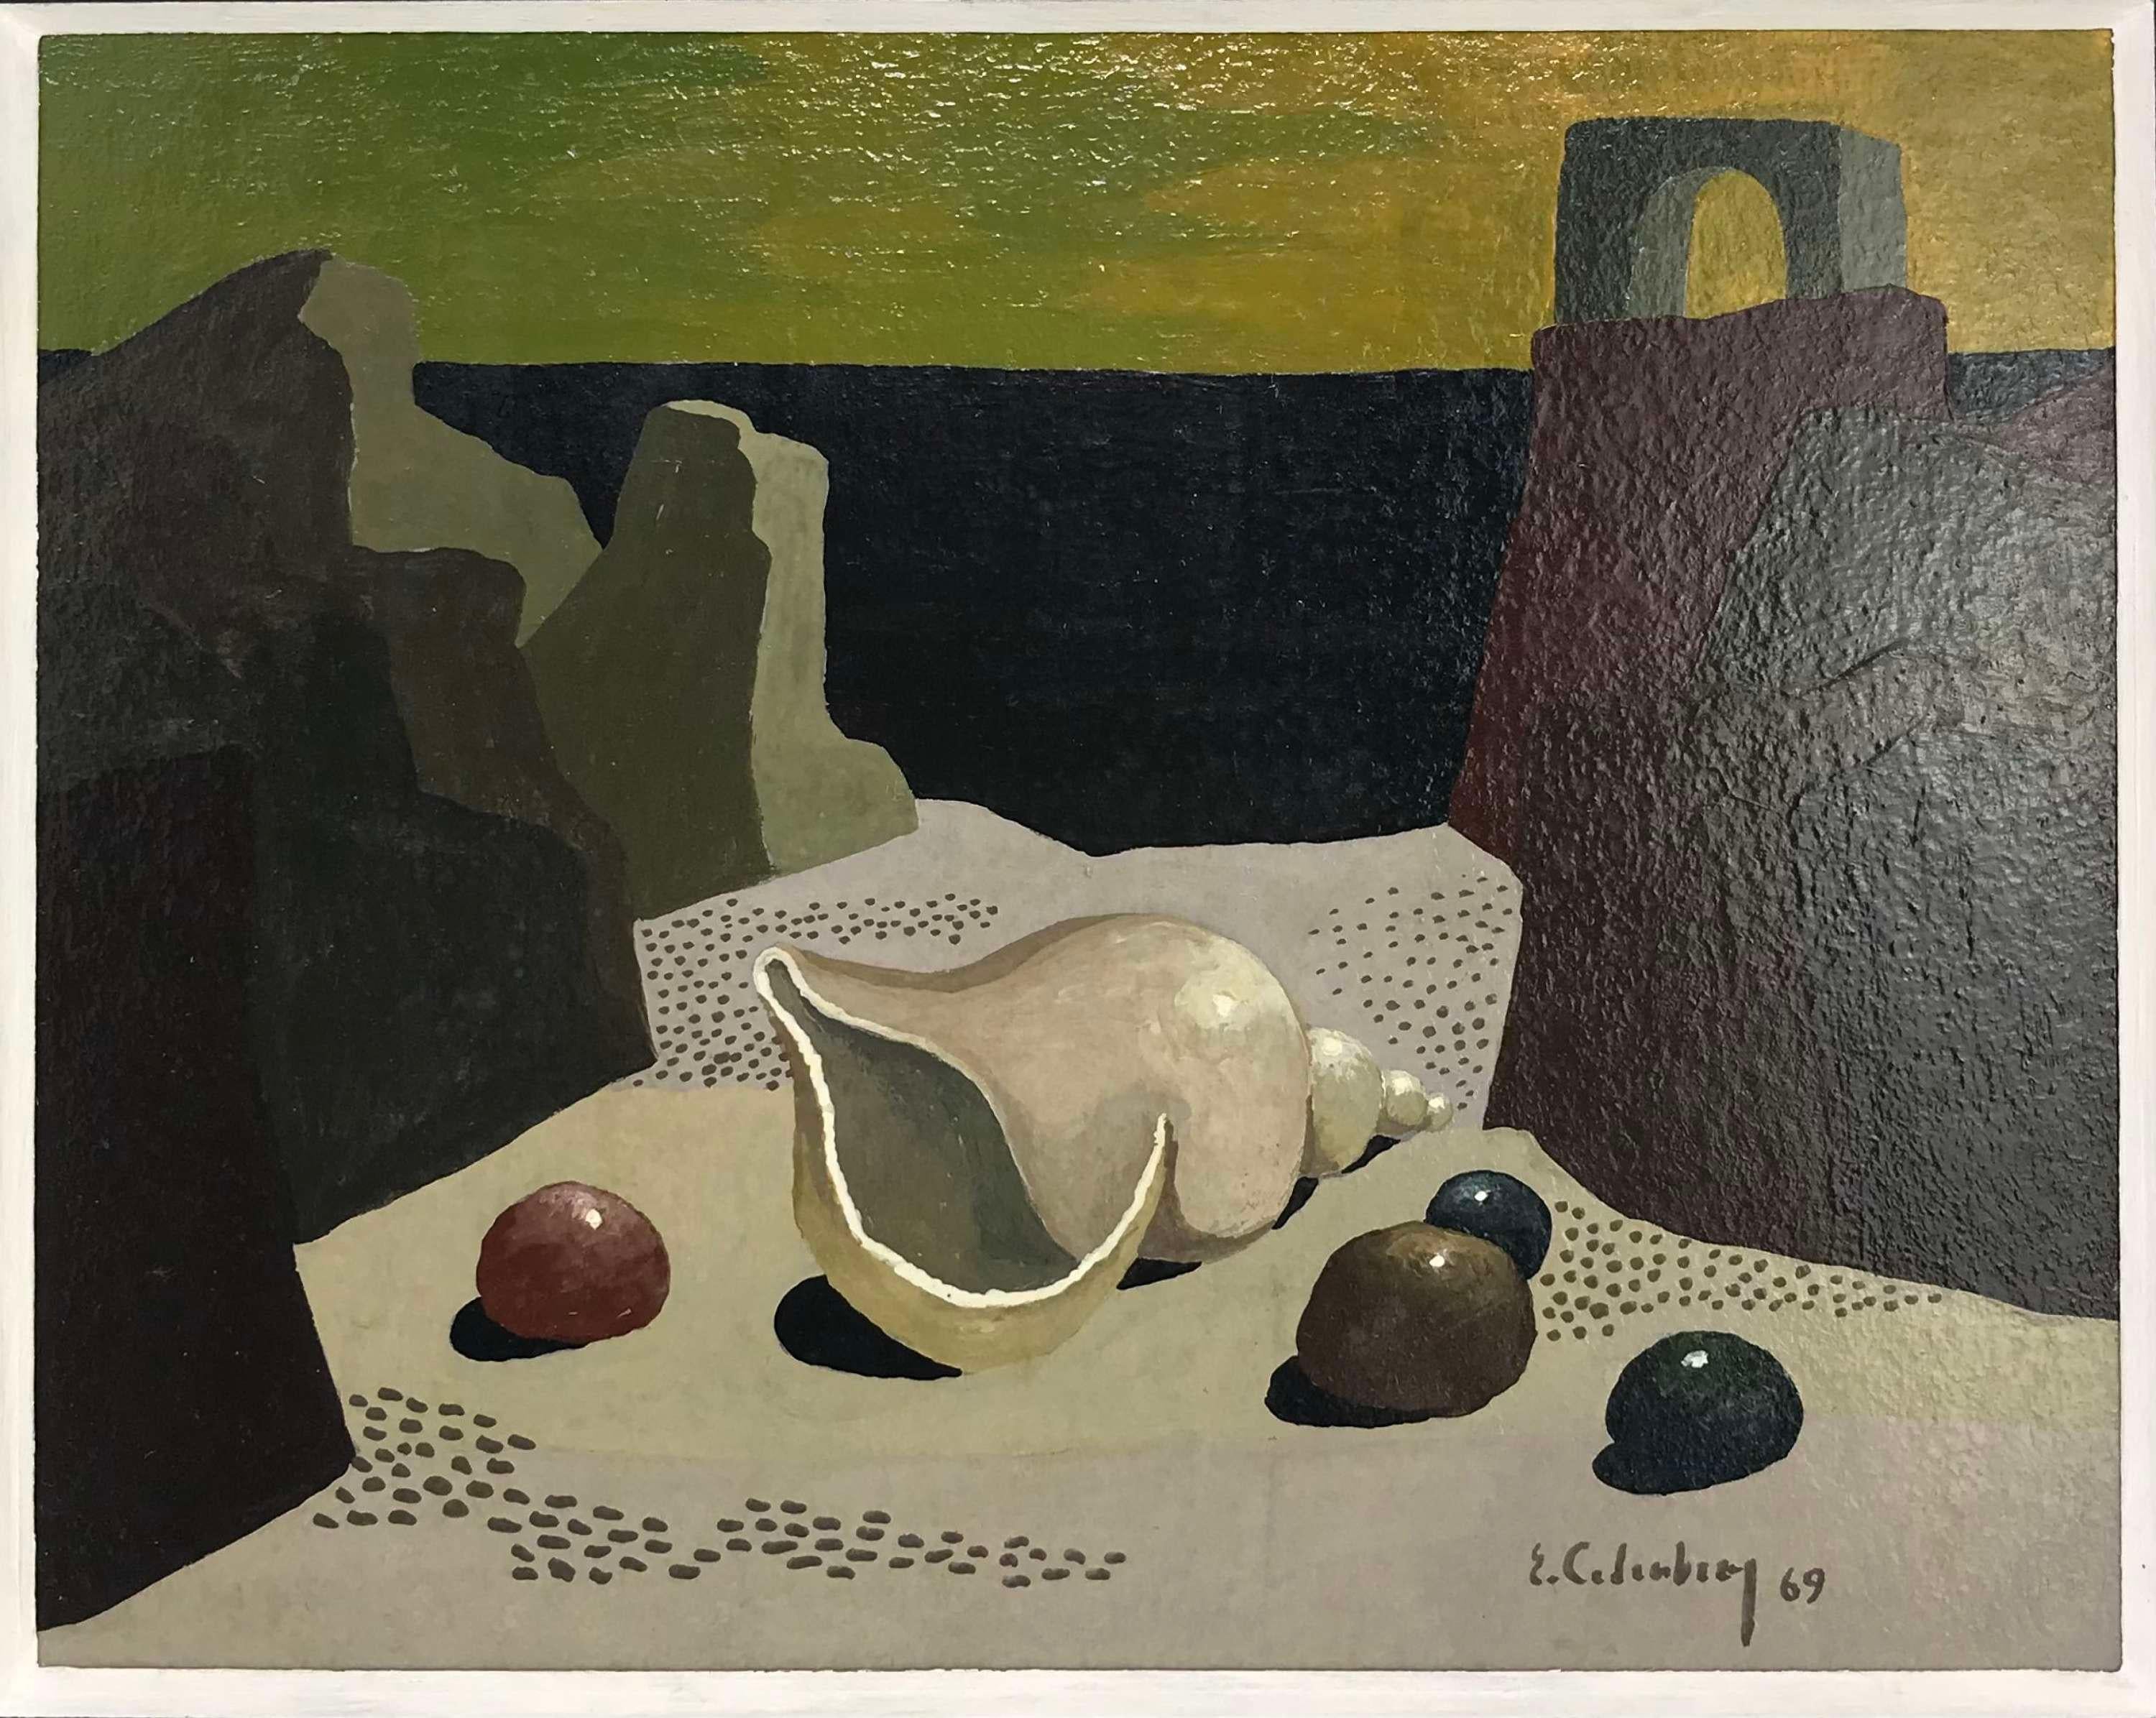 Eric Cederberg Surreal beach scene with shell and pebbles. Tempera on board, Sweden. Signed and dated 1969. Framed.

From a private collection.


Eric Cederberg (1897-1984) was a Swedish artist based in southern Sweden. He began exhibiting his